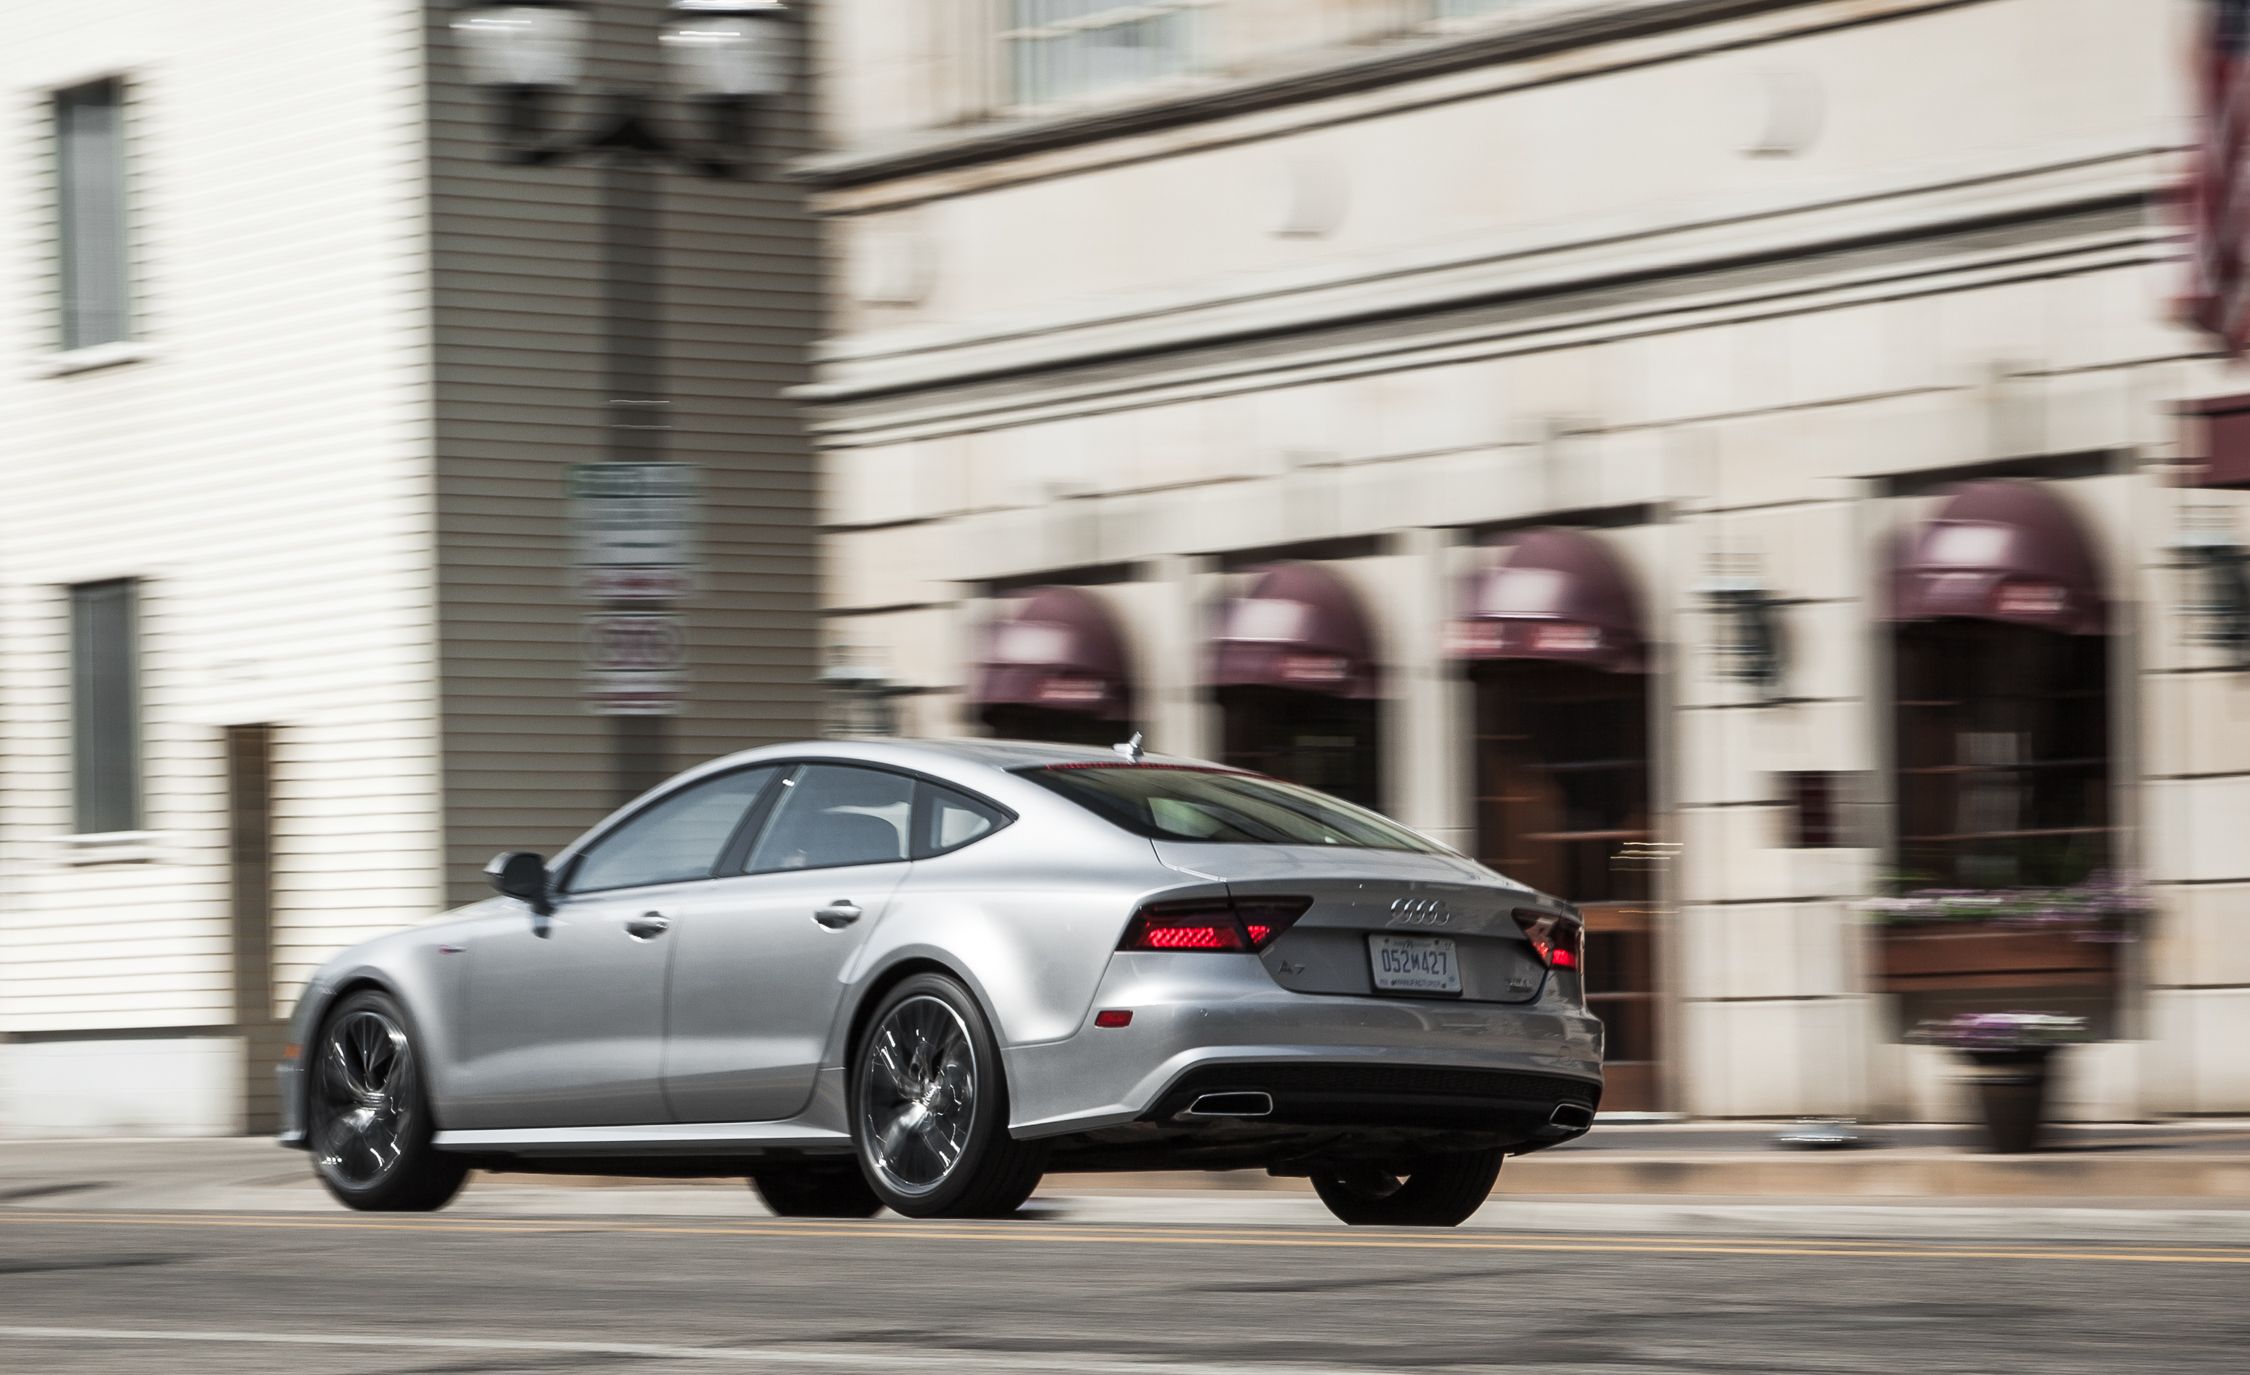 2016 Audi A7 Test Drive Rear And Side View (View 10 of 26)